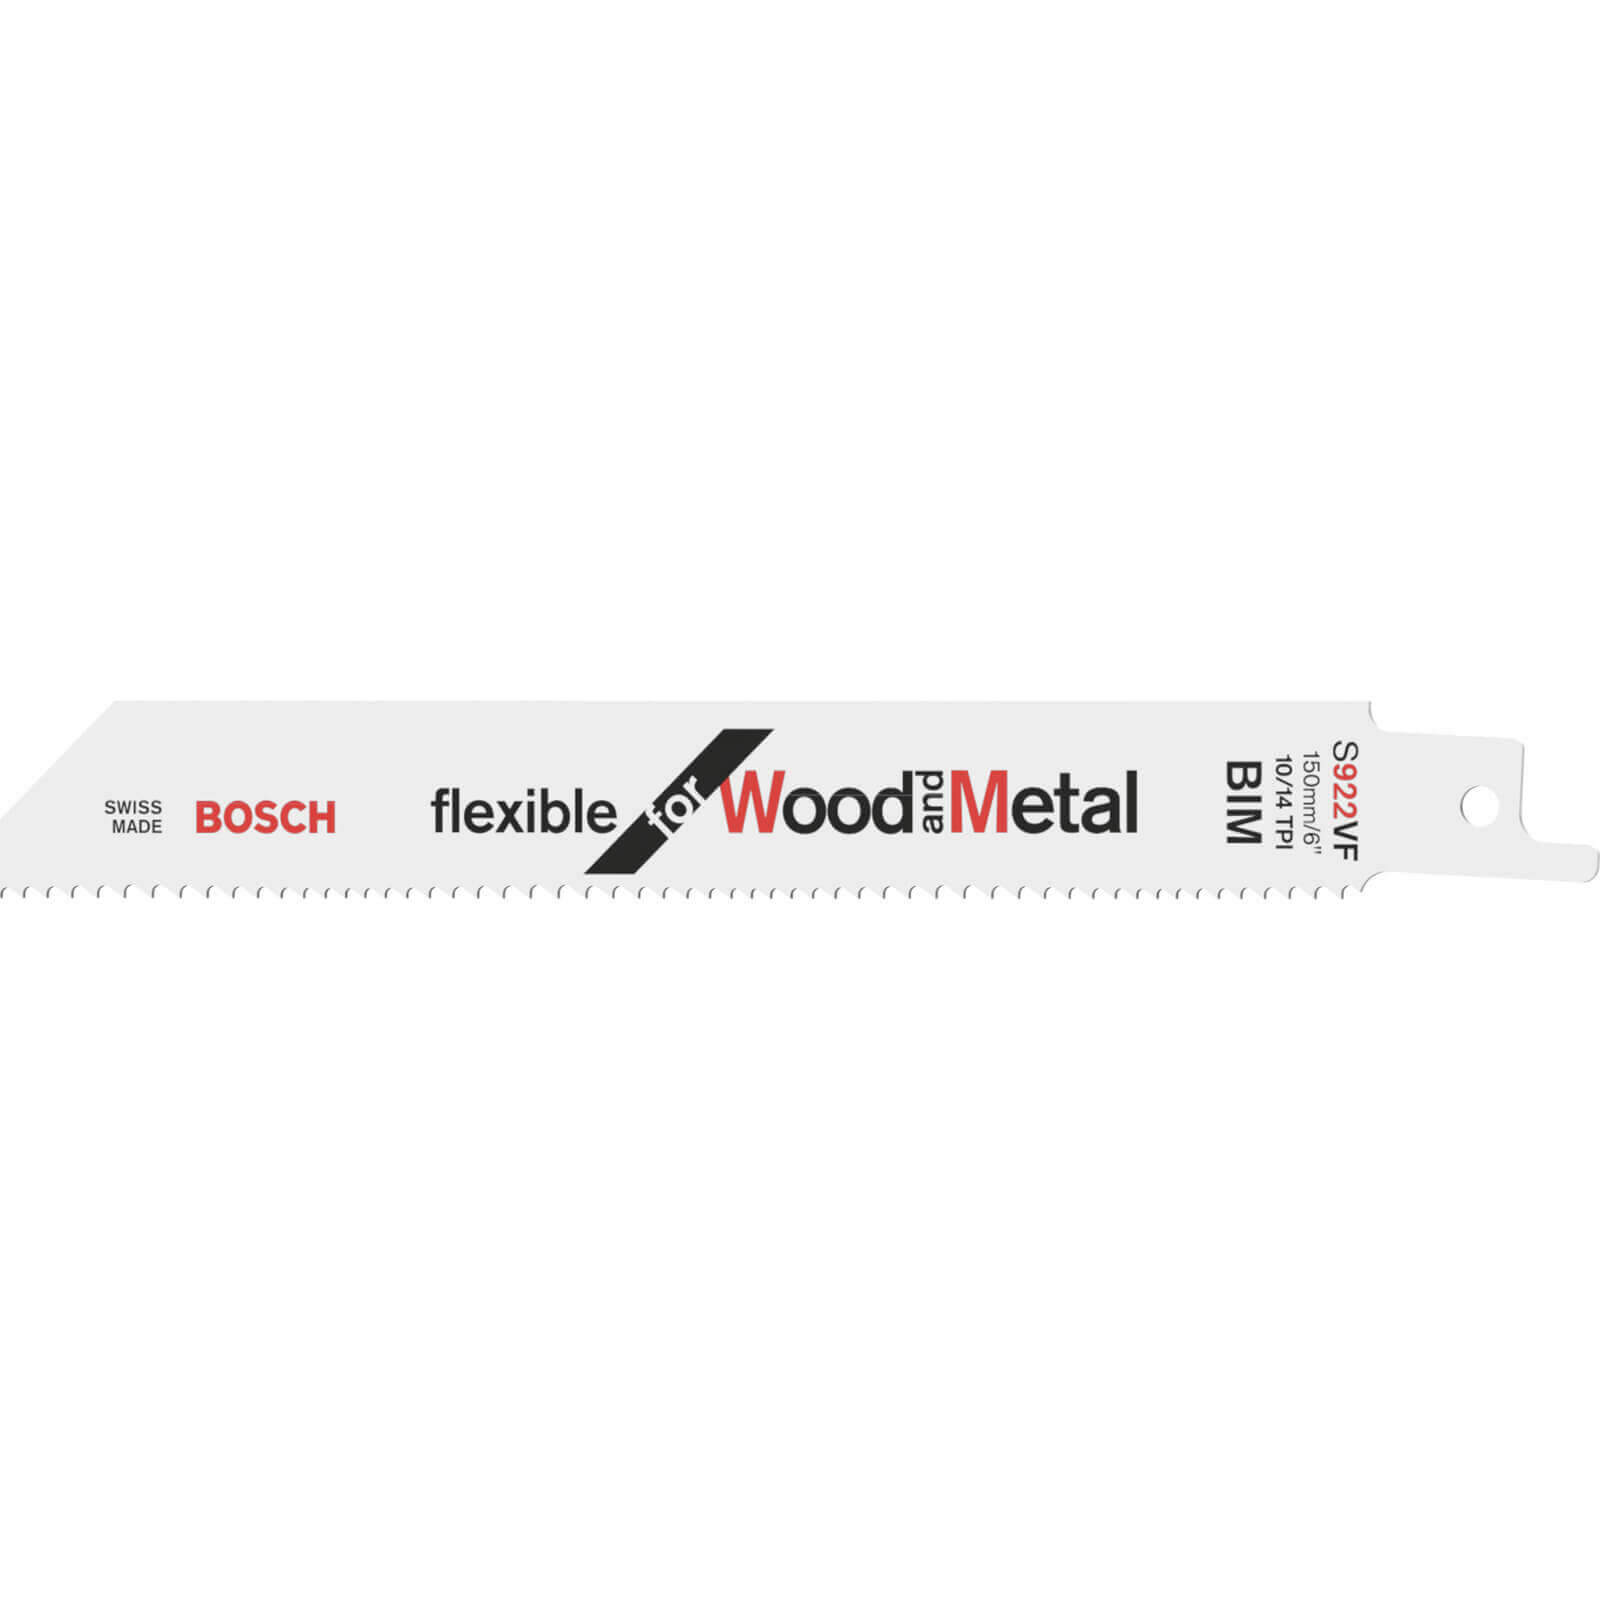 Photo of Bosch S922vf Wood And Metal Cutting Reciprocating Saw Blades Pack Of 25